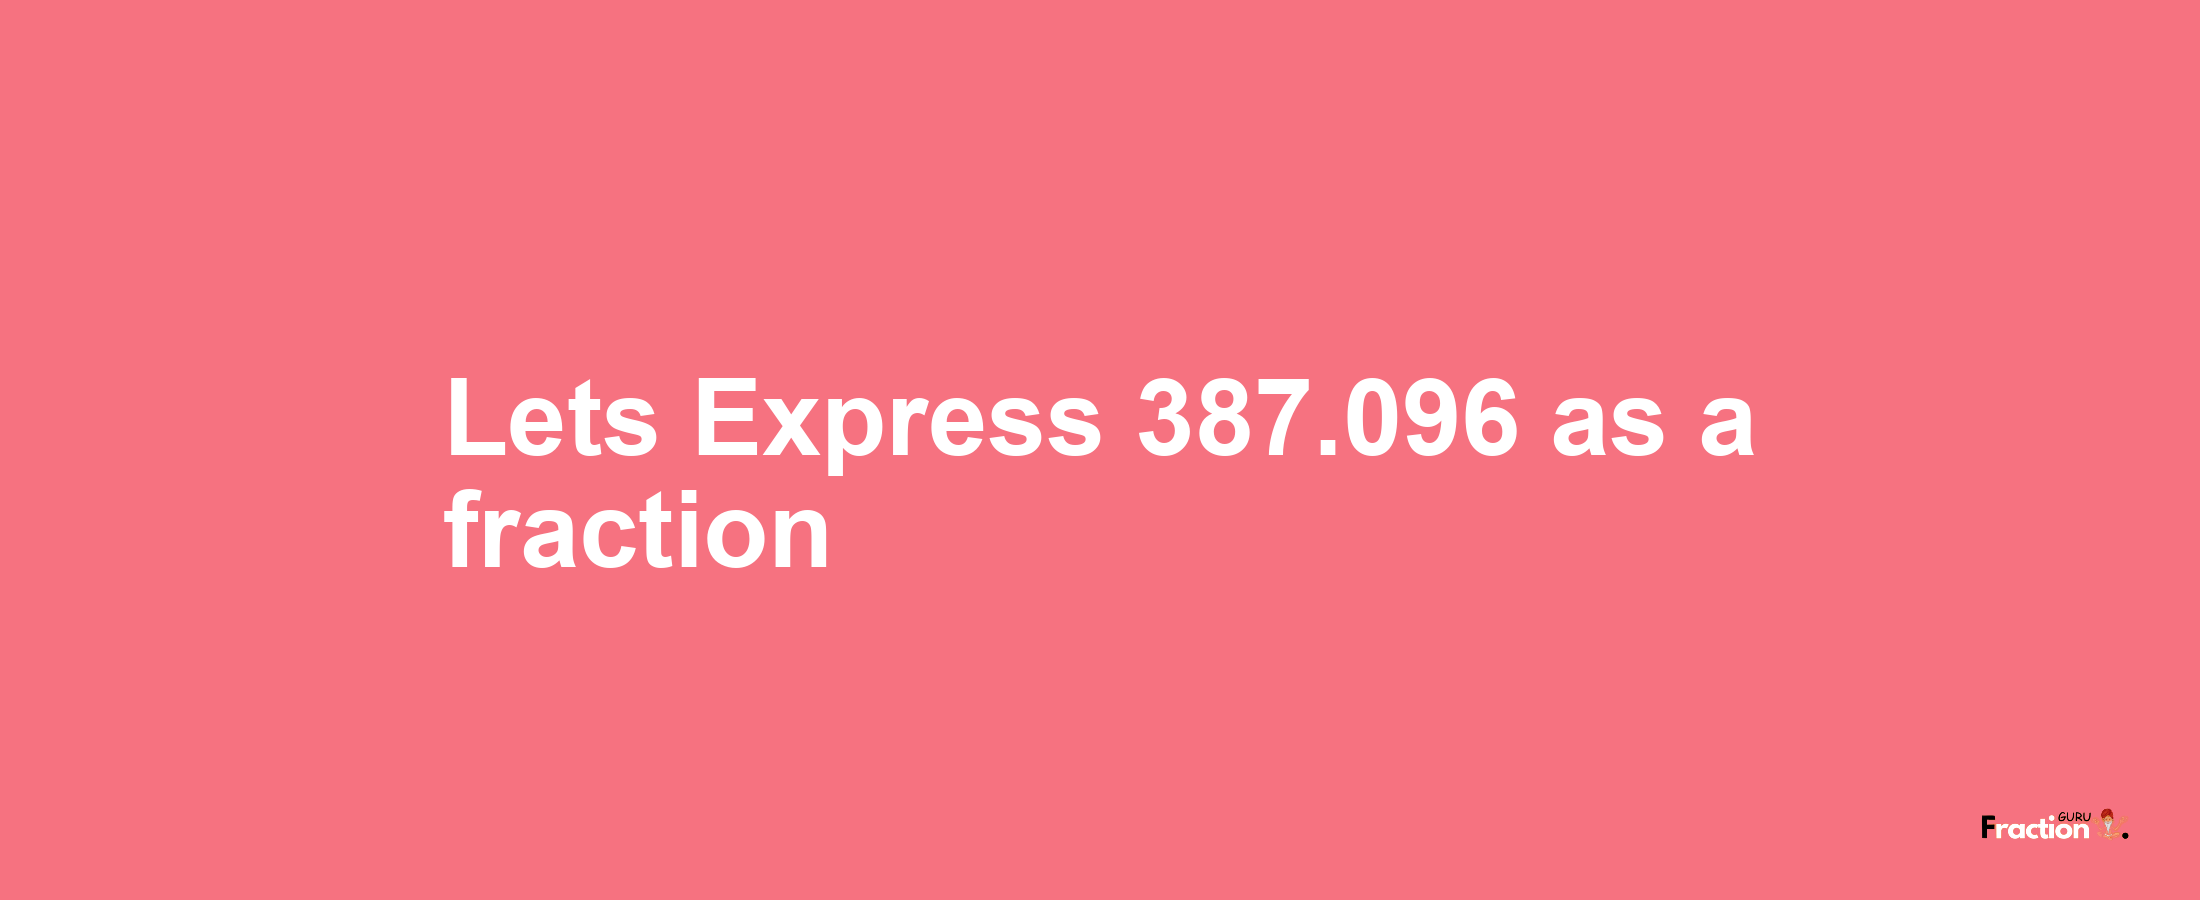 Lets Express 387.096 as afraction